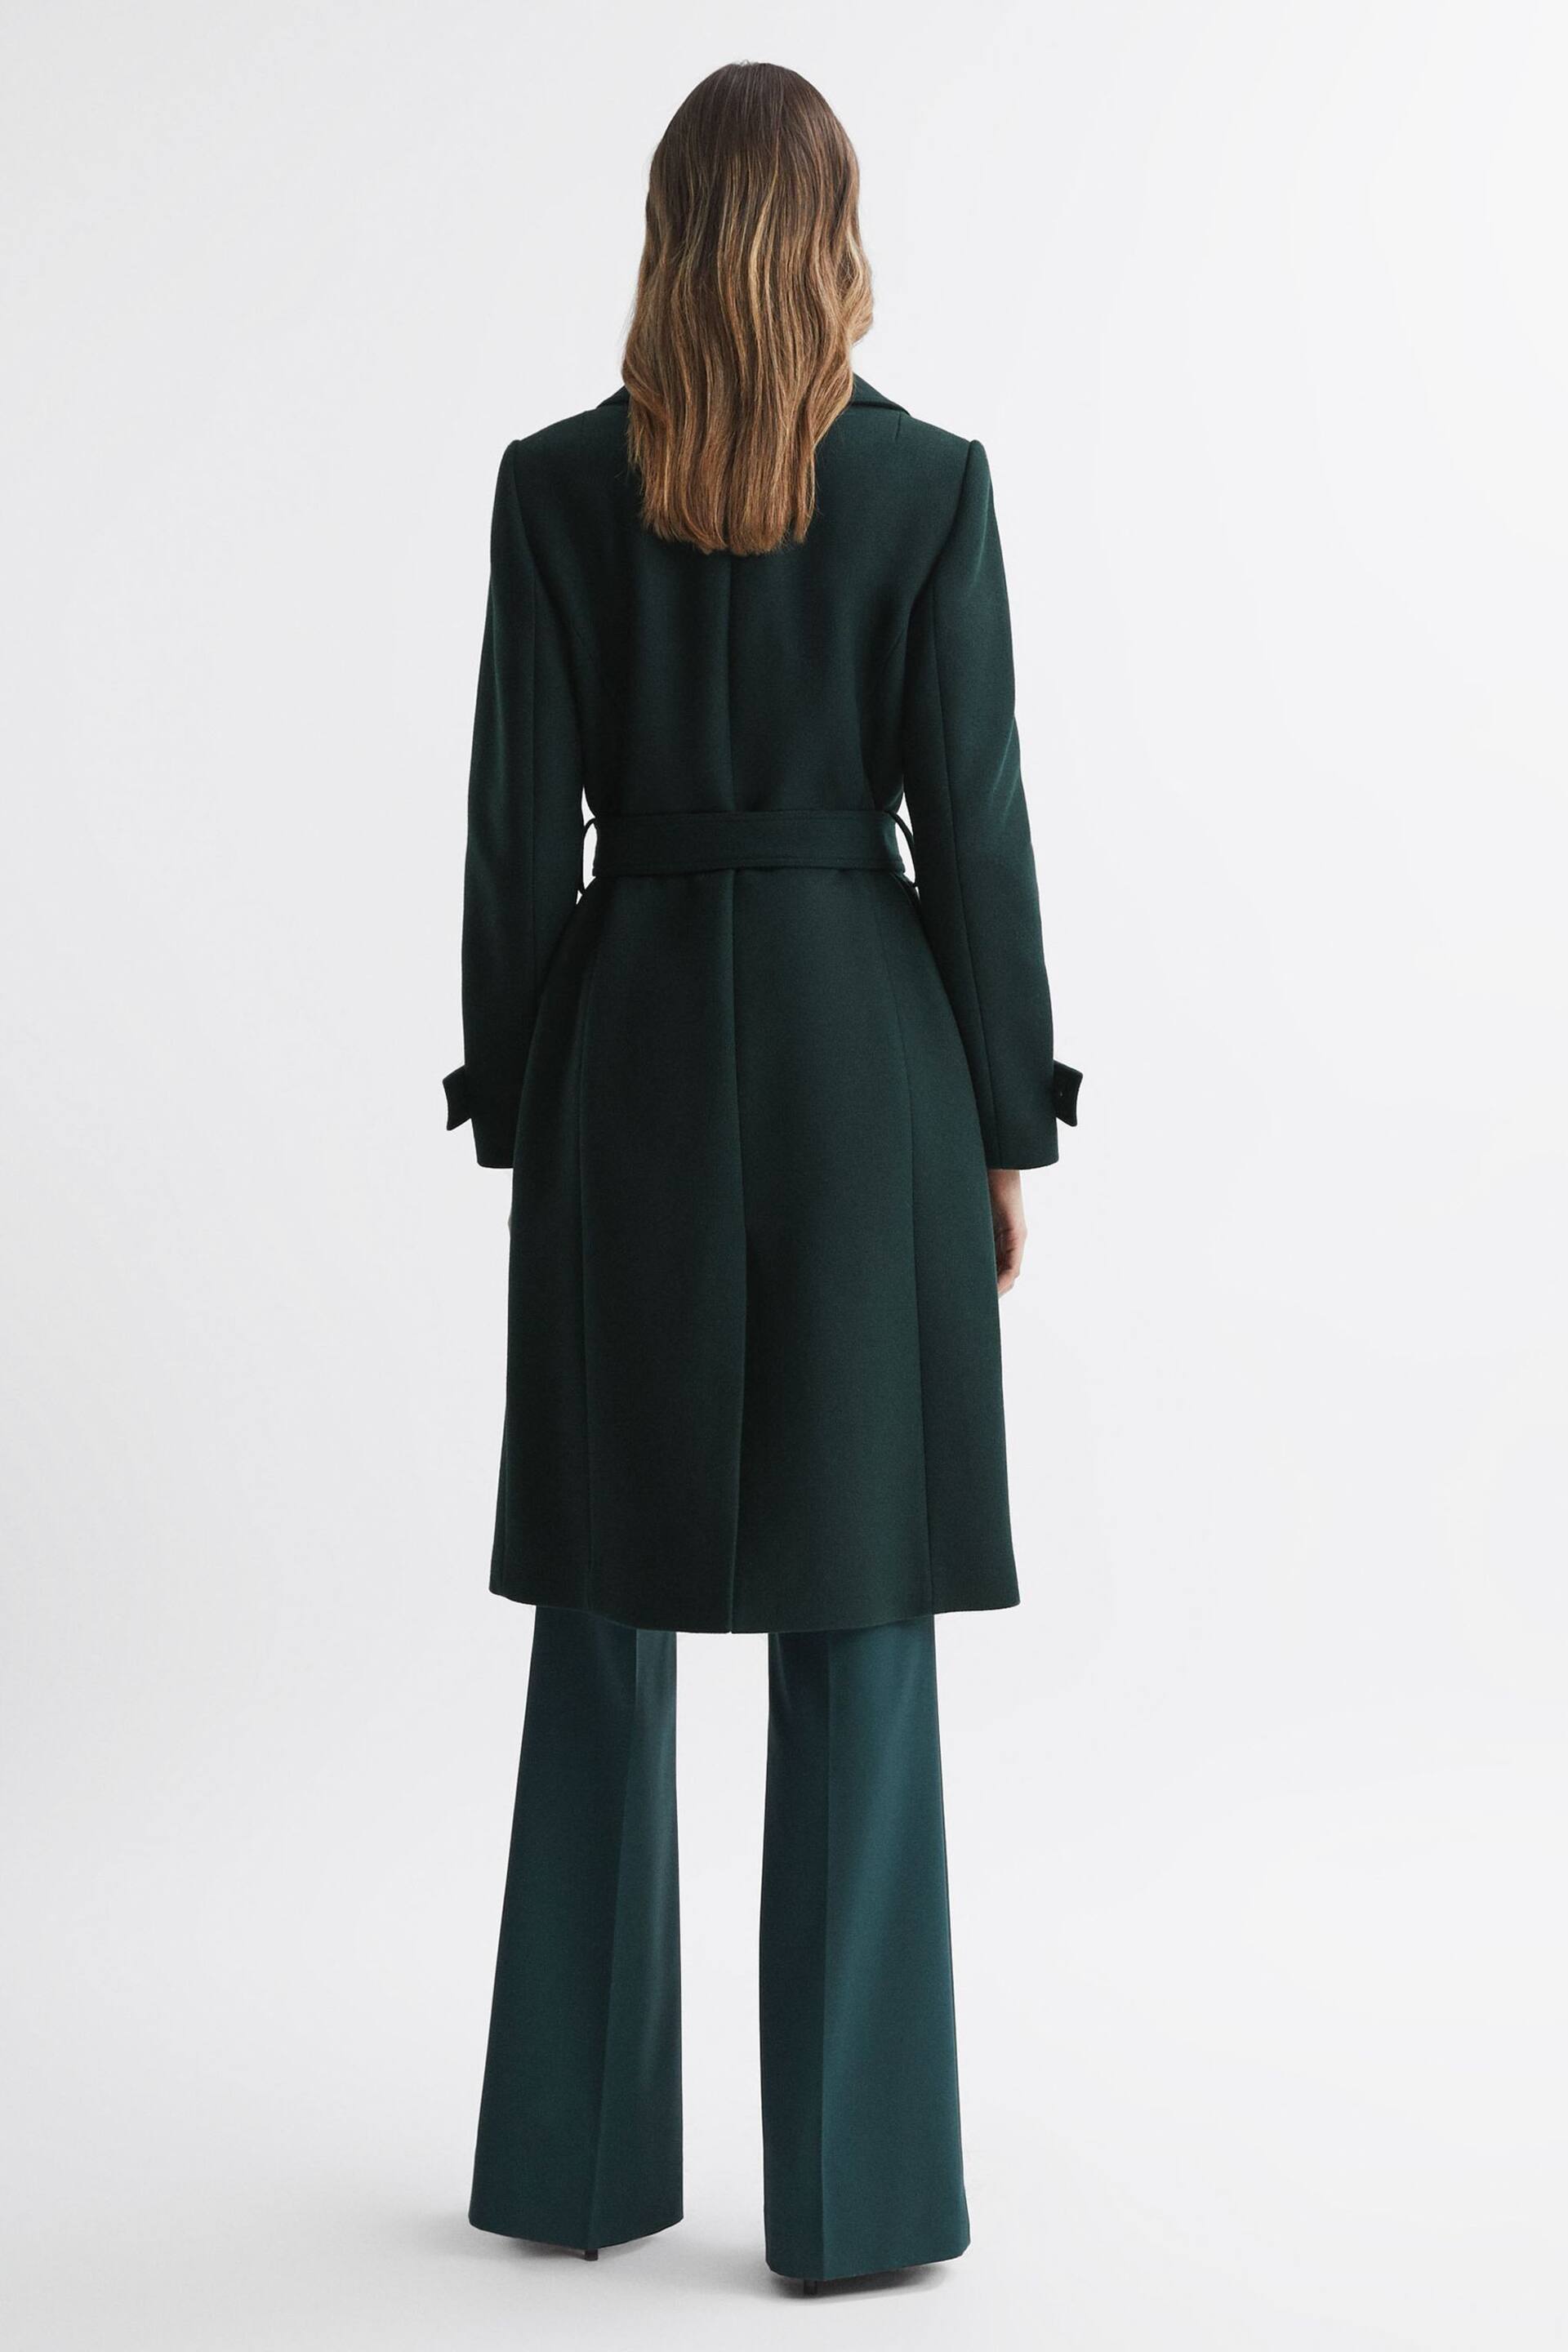 Reiss Green Tor Relaxed Wool Blend Belted Coat - Image 5 of 5